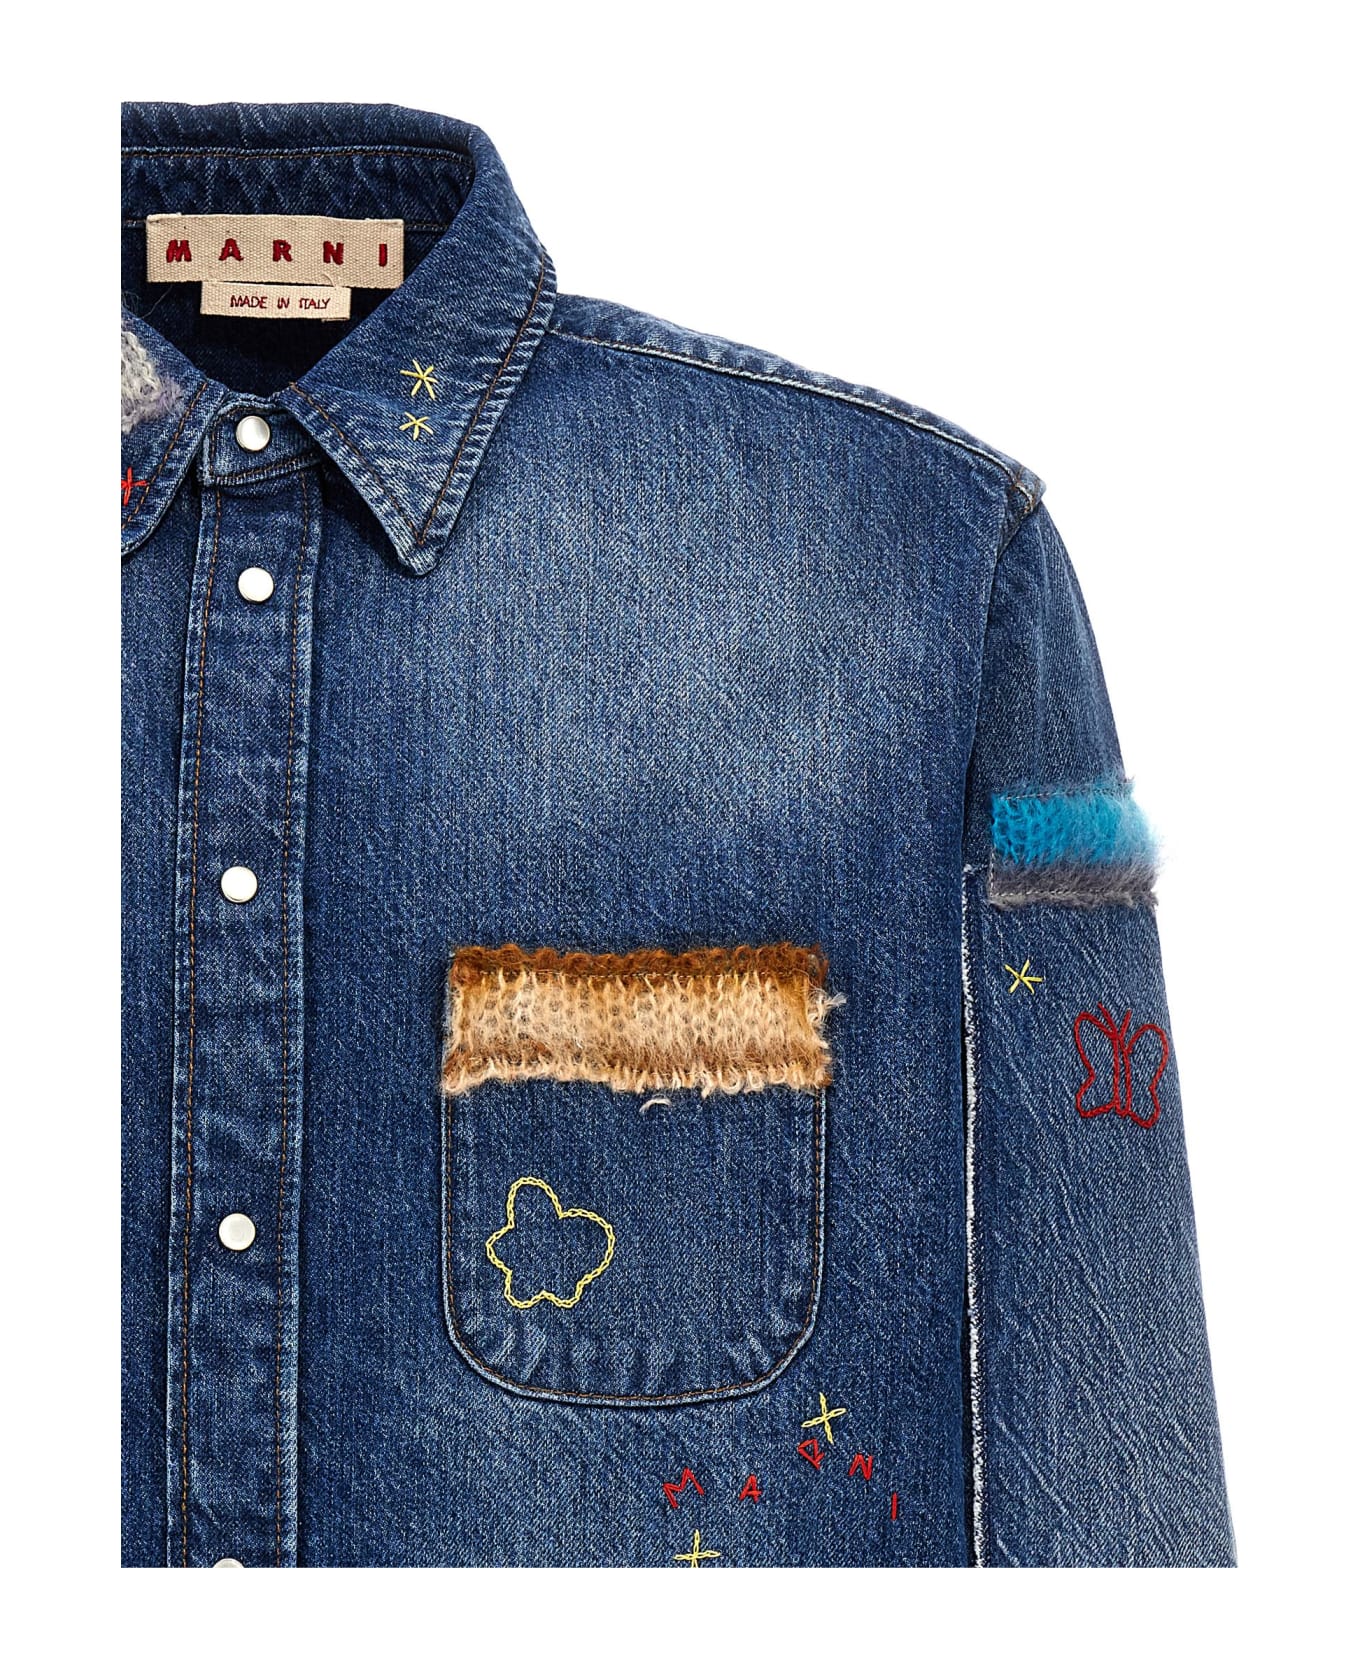 Marni Denim Shirt, Embroidery And Patches - Blue シャツ